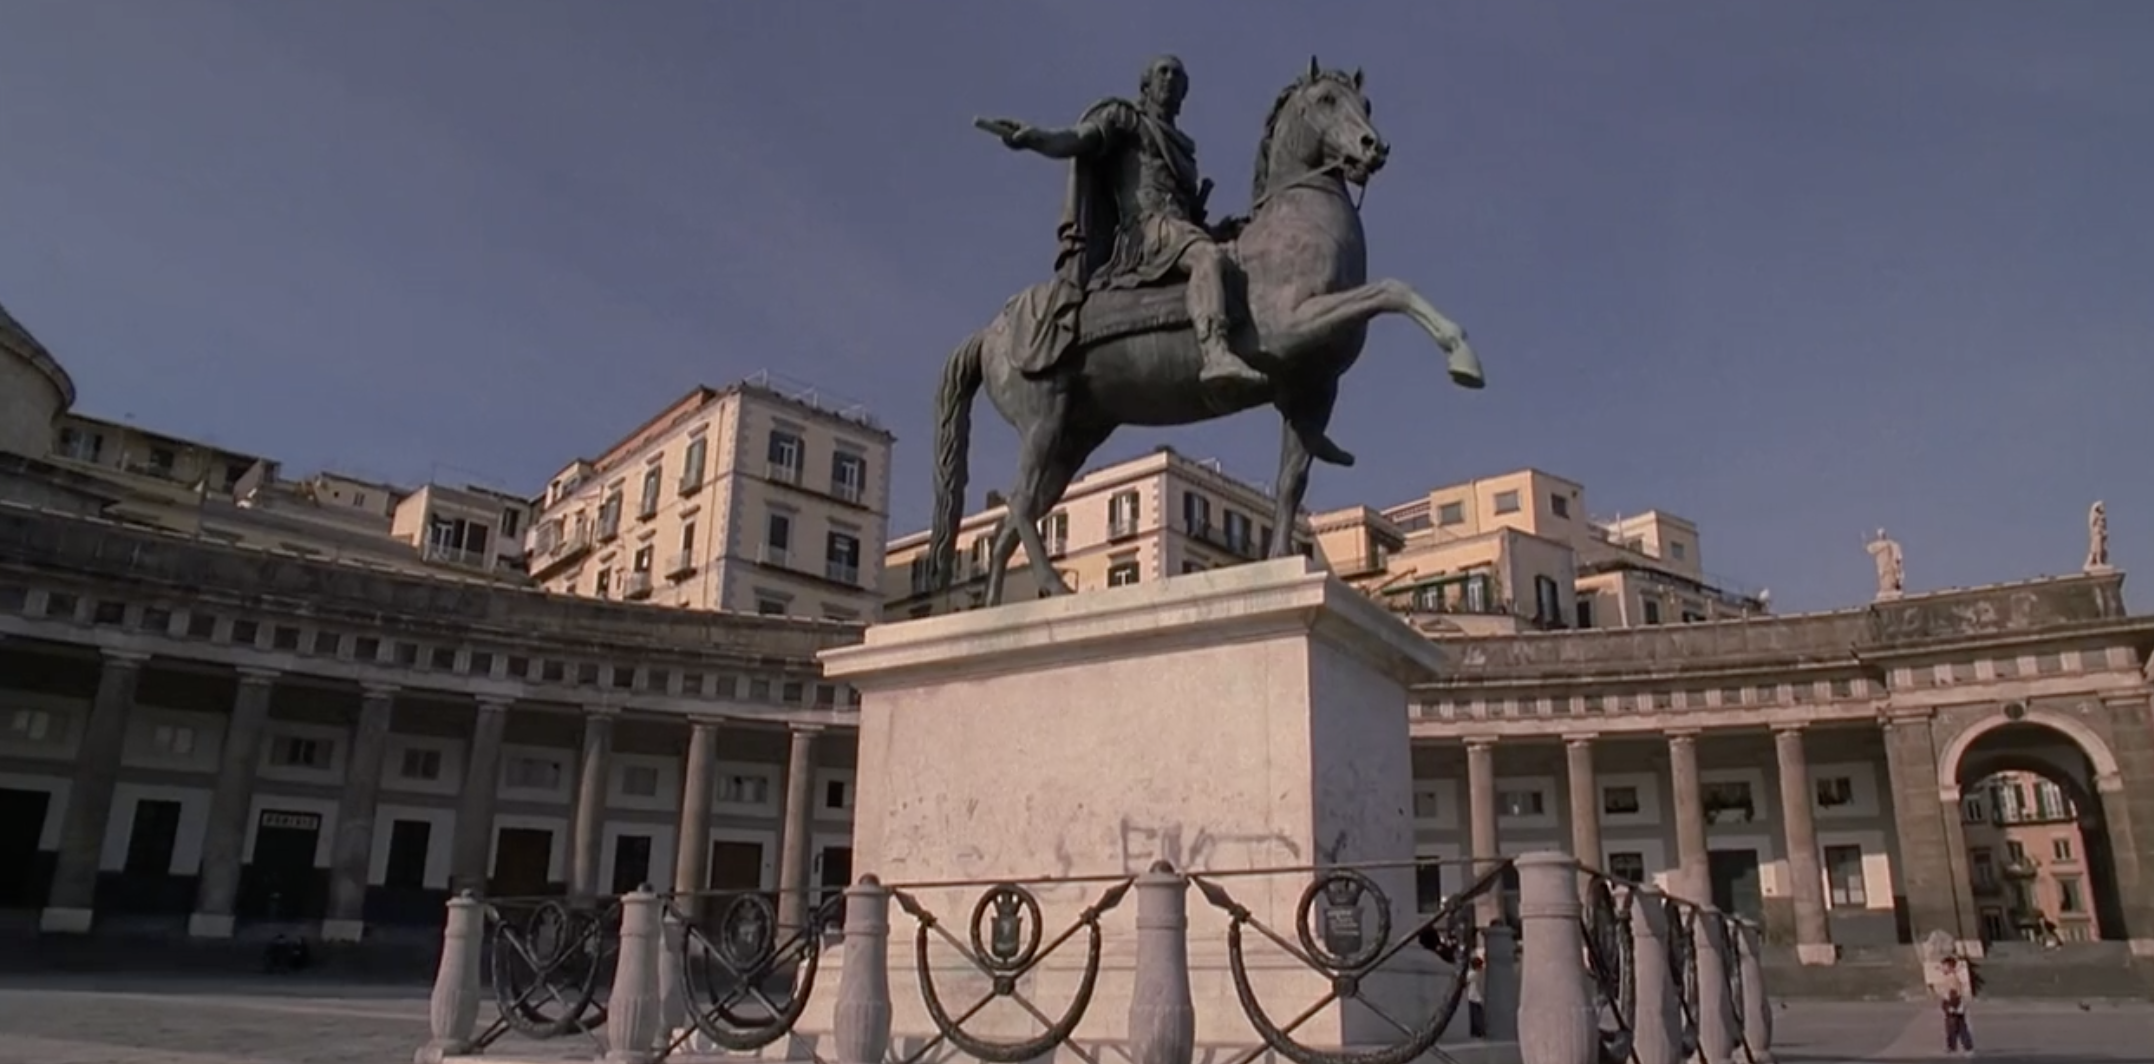 Piazza statue in Naples Italy from The Sopranos. HBO/Entertainment image credit. 